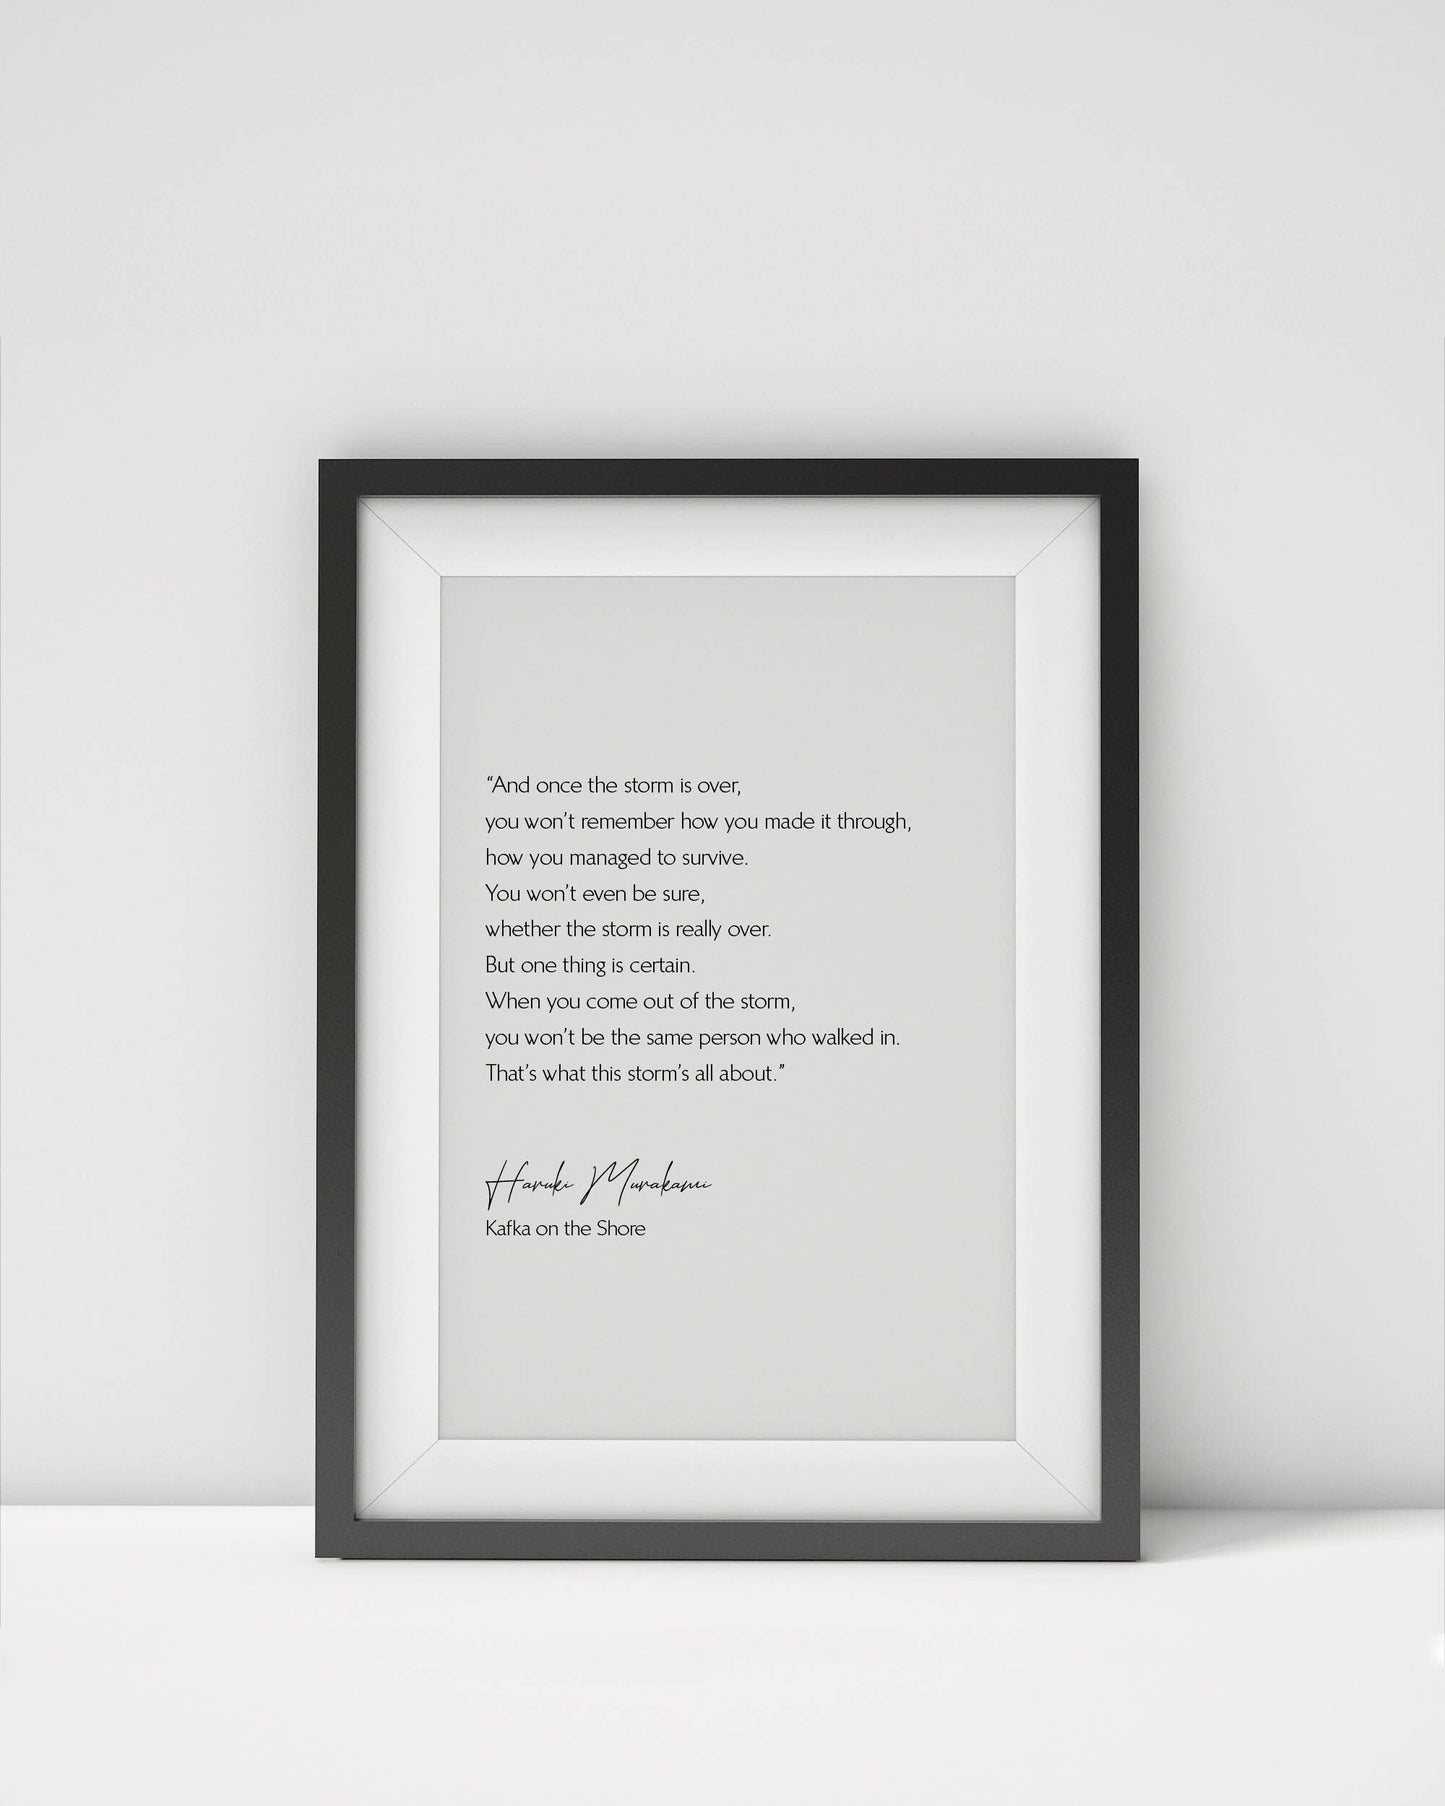 And Once The Storm Is Over print by Haruki Murakami kafka on the shore Quote Print Black & White Inspirational Quote Wall Art Prints framed